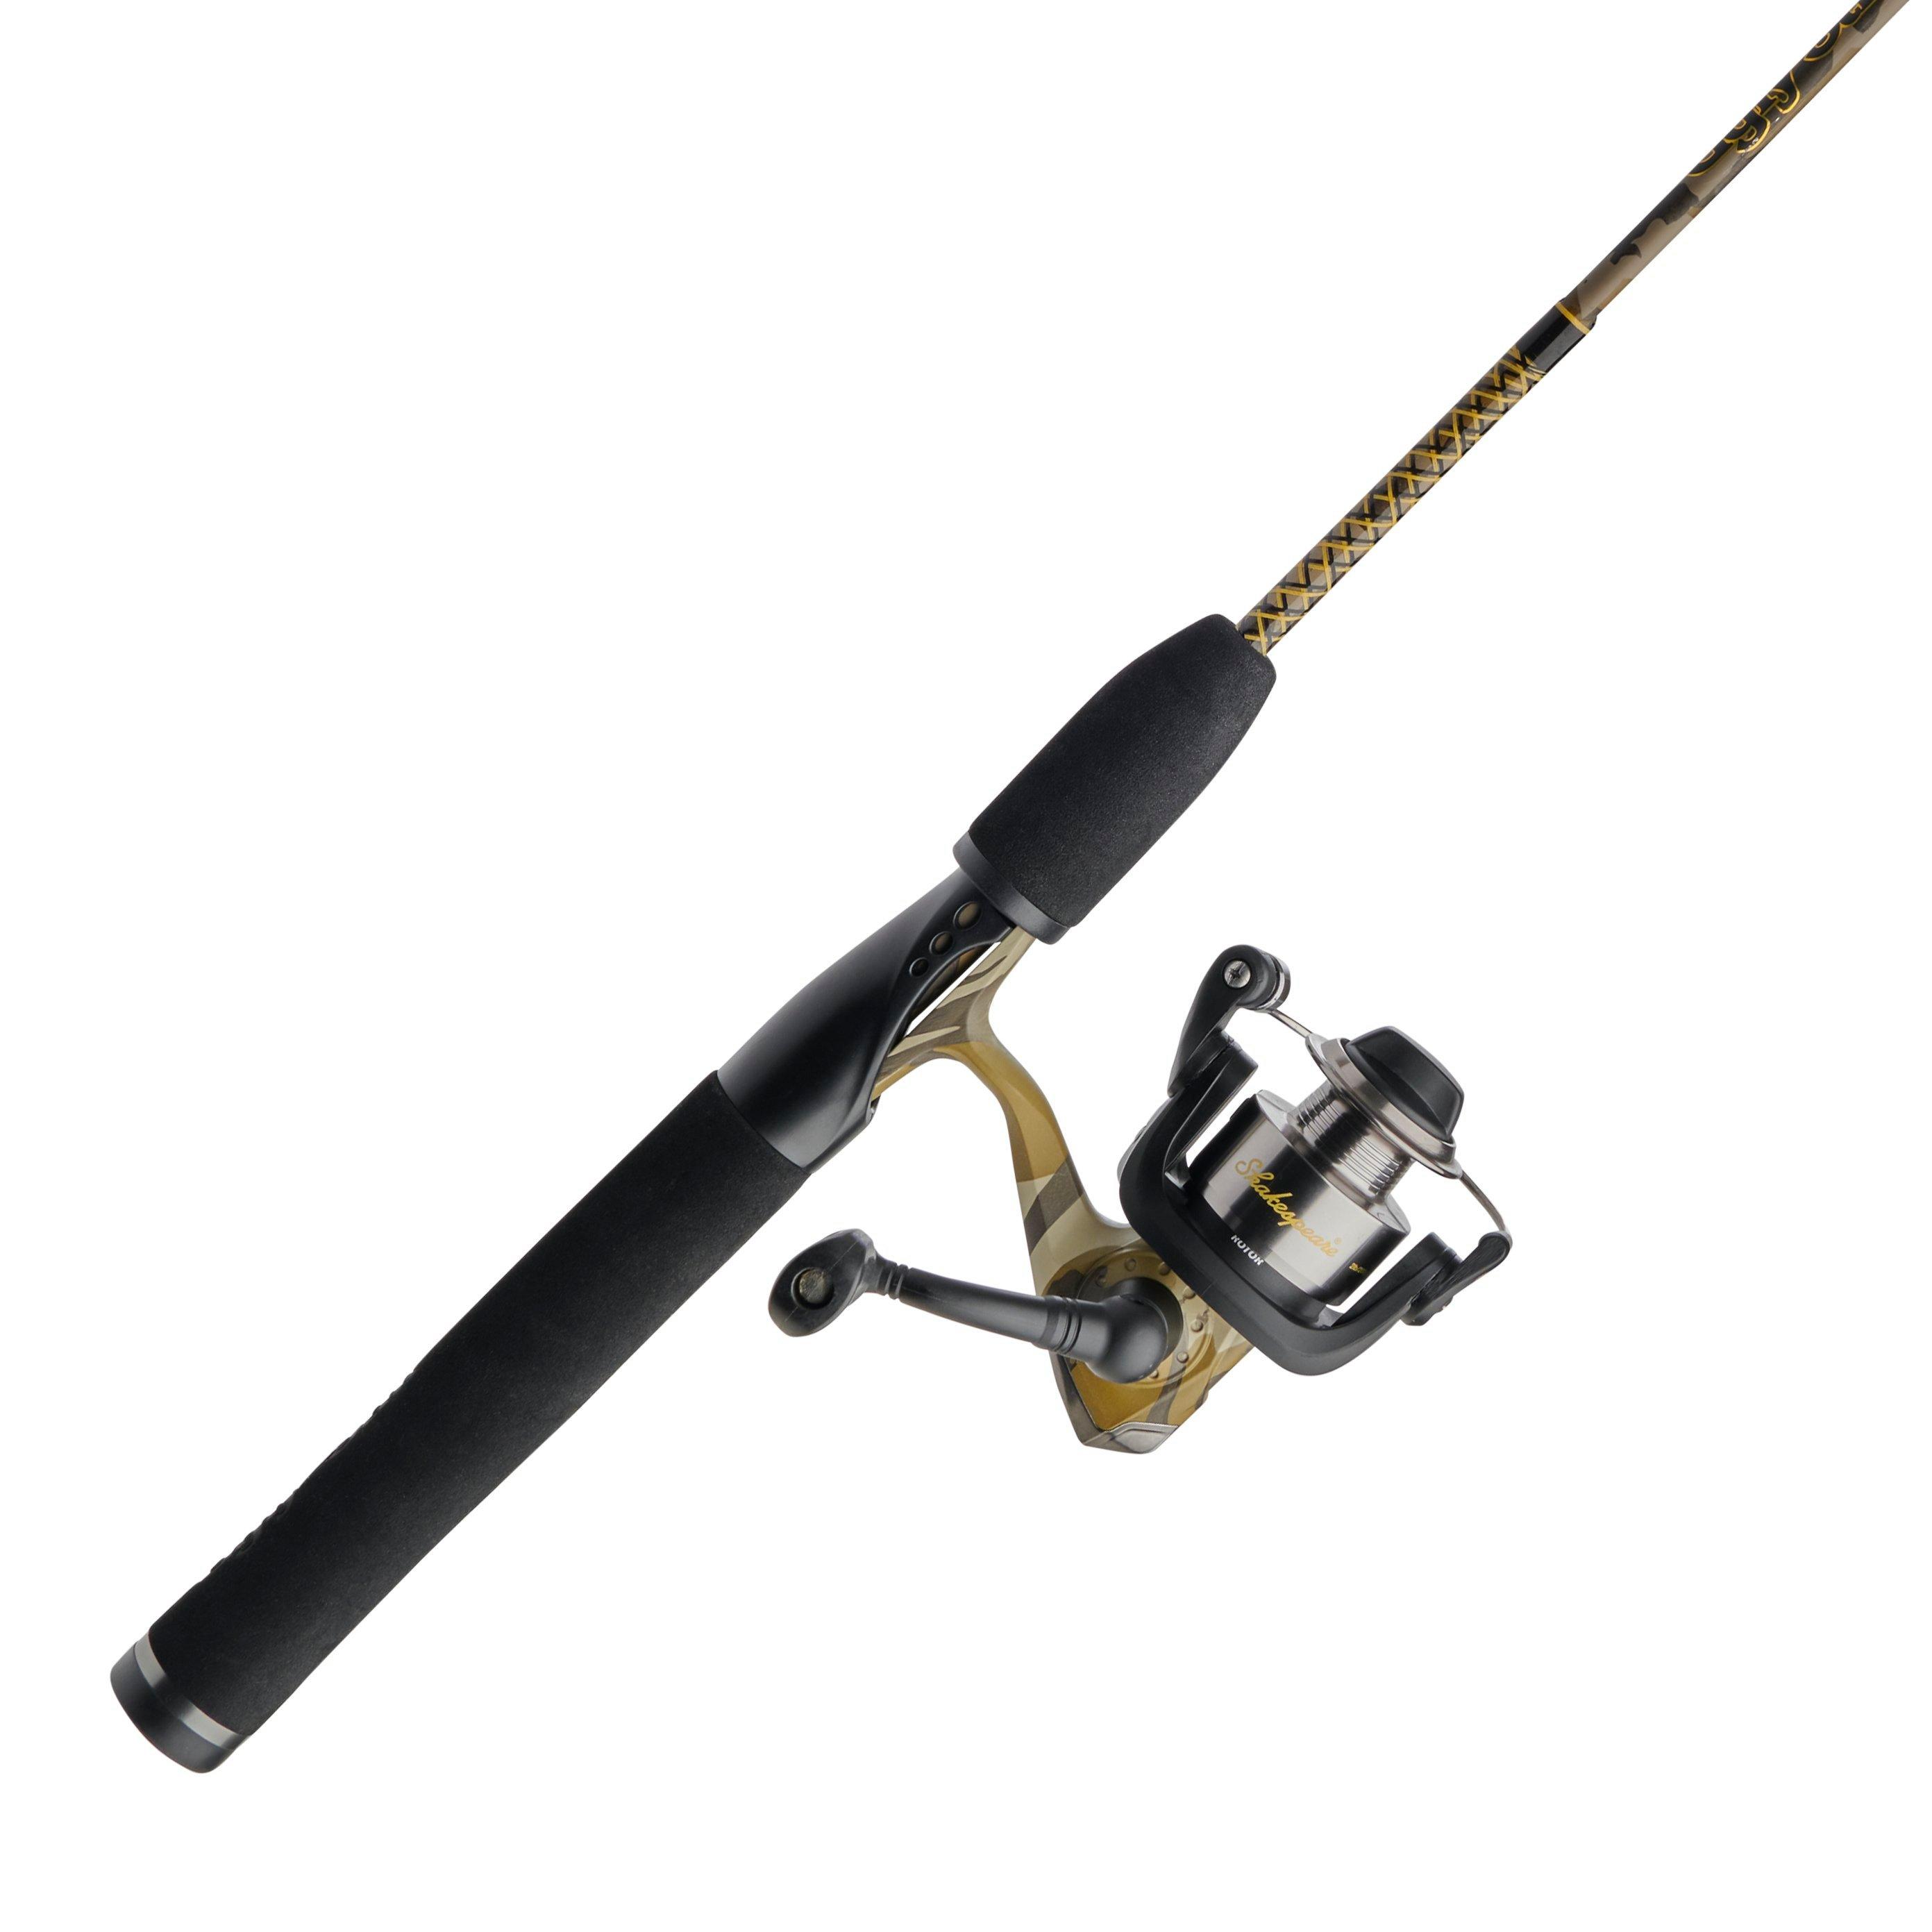 https://op2.0ps.us/original/opplanet-ugly-stik-camo-spinning-combo-5-0-1-right-left-30-6ft-6in-rod-length-medium-power-2-pieces-rod-uscamosp662m-30cbo-main